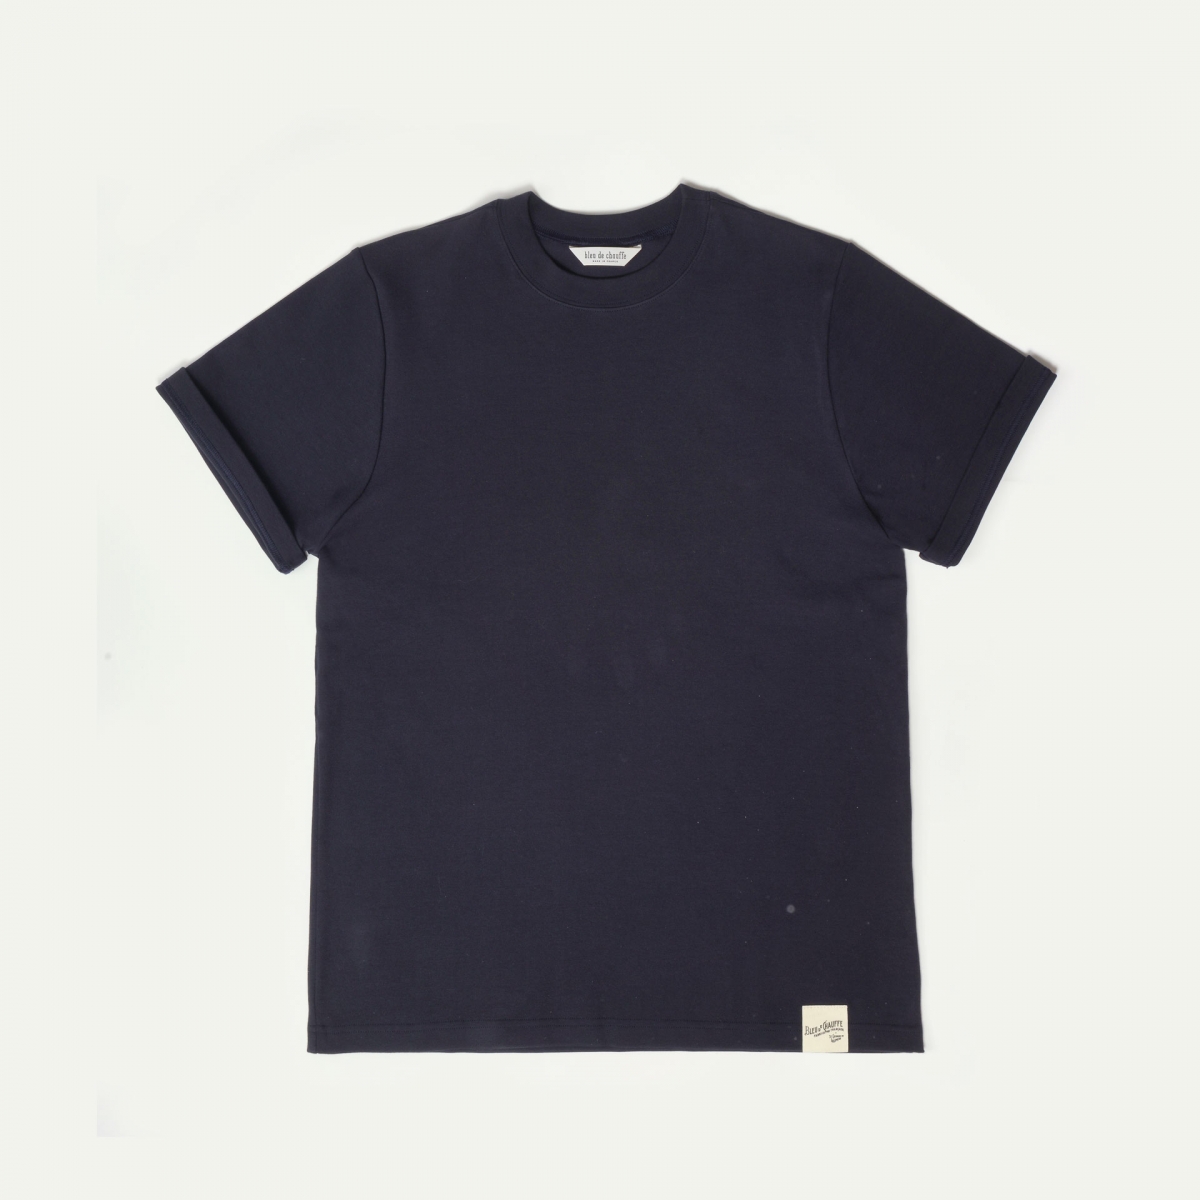 Le T shirt Heavy weight champion - Navy (image n°7)